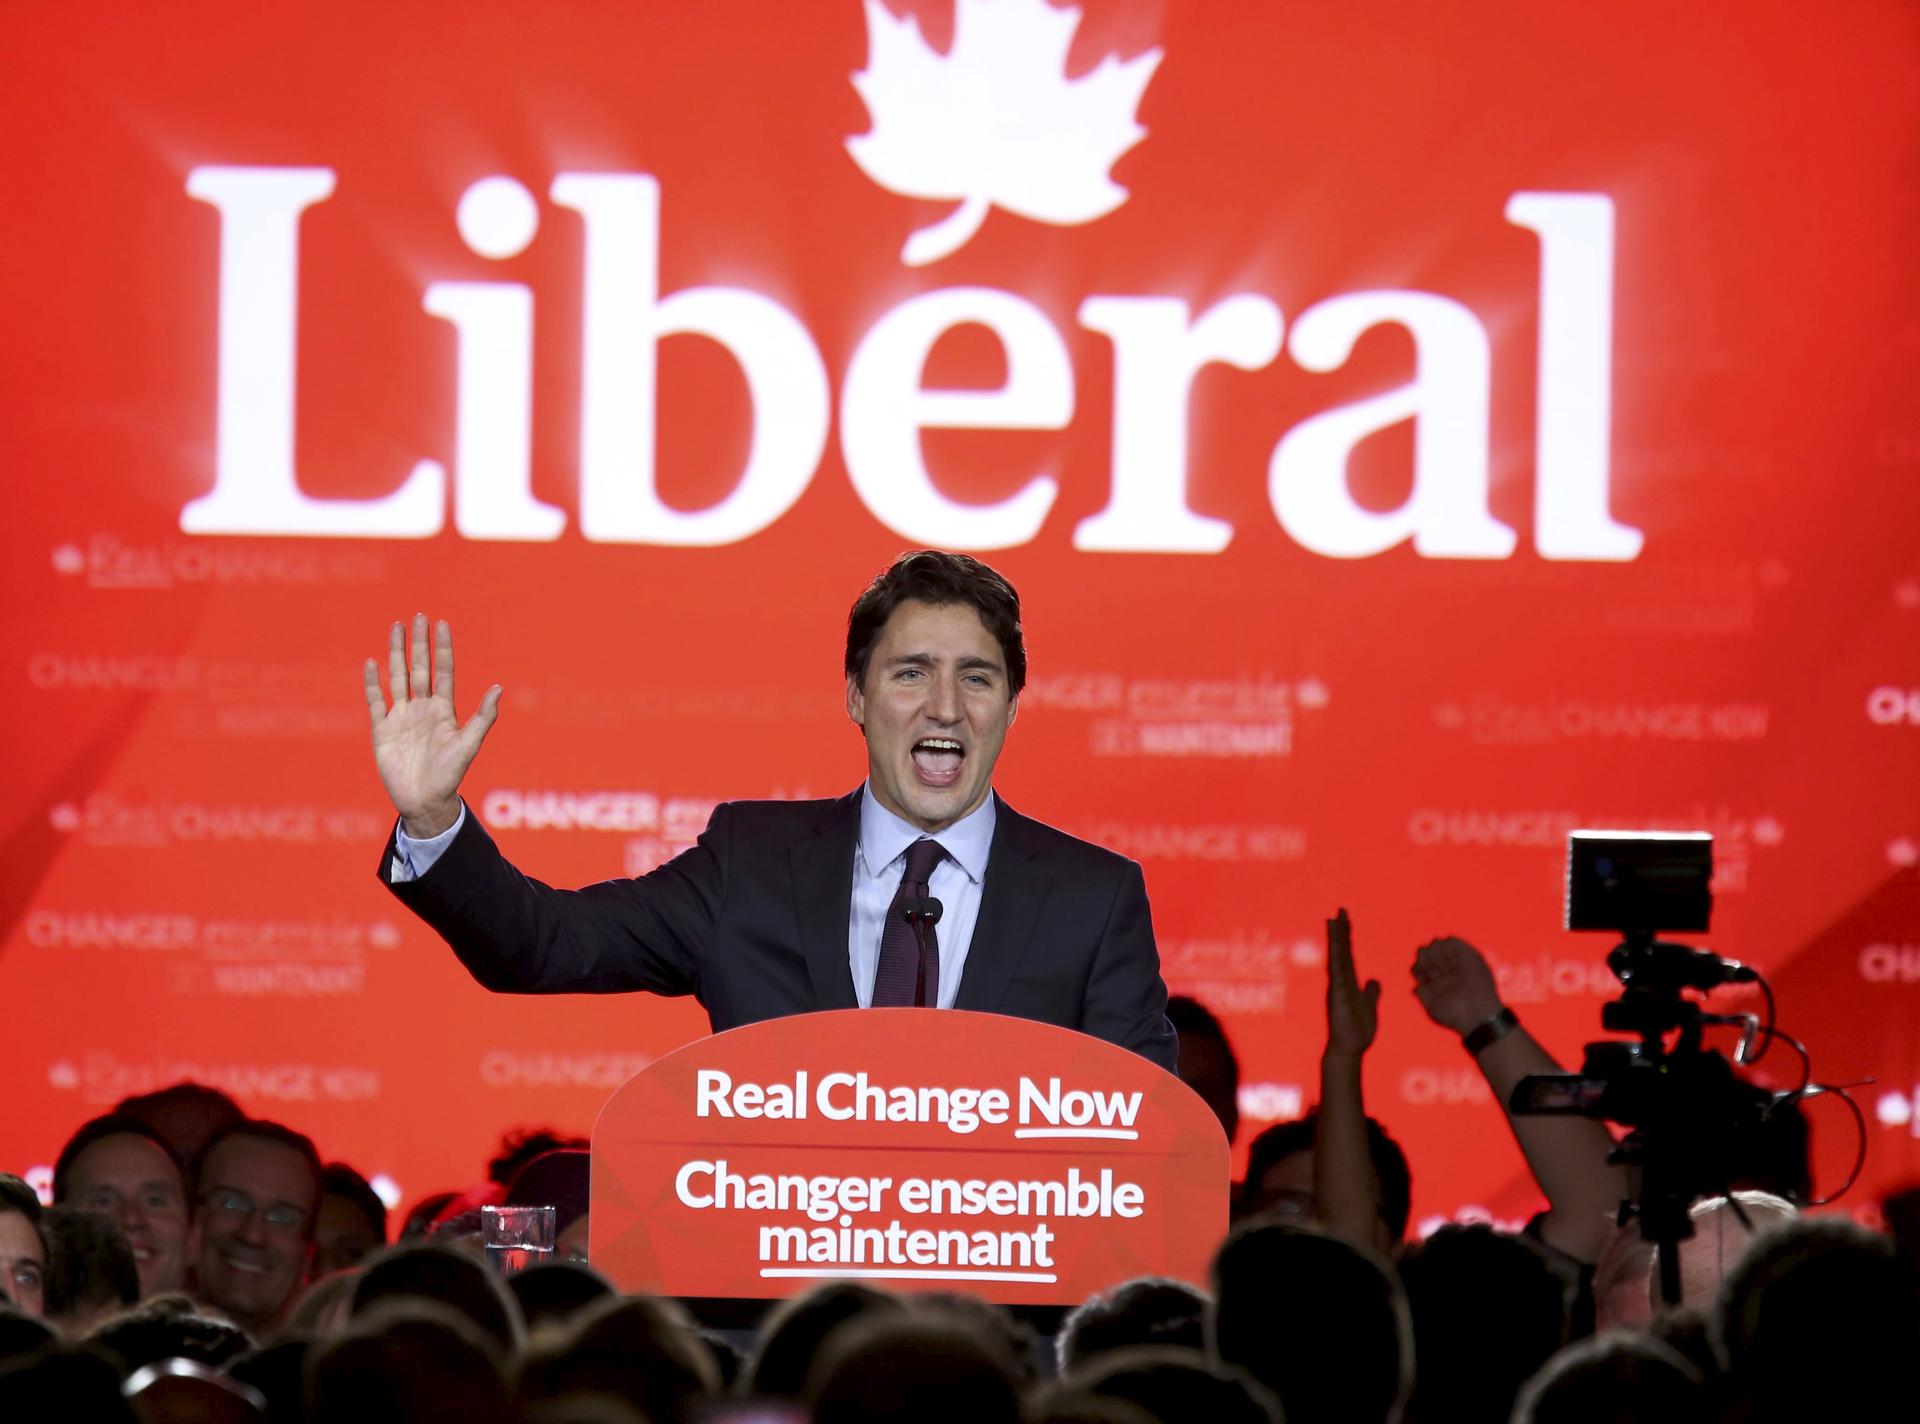 Liberal Party leader Justin Trudeau gives his victory speech after Canada's federal election in Montreal, Quebec, October 19, 2015.